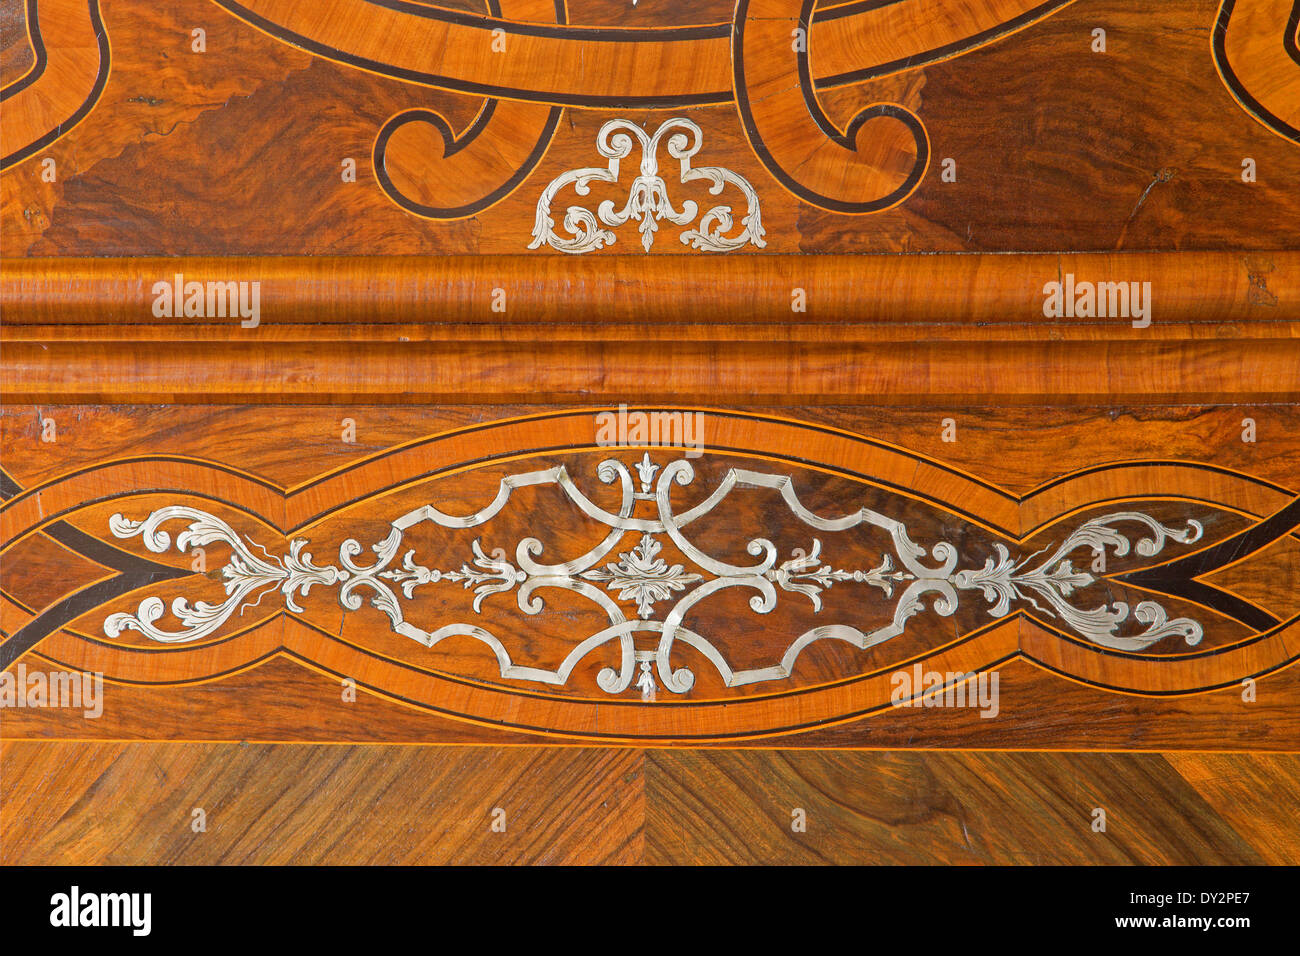 VIENNA, AUSTRIA - FEBRUARY 17, 2014: Detail of baroque intarsia on the sacristy door of St. Anne's Church. Stock Photo